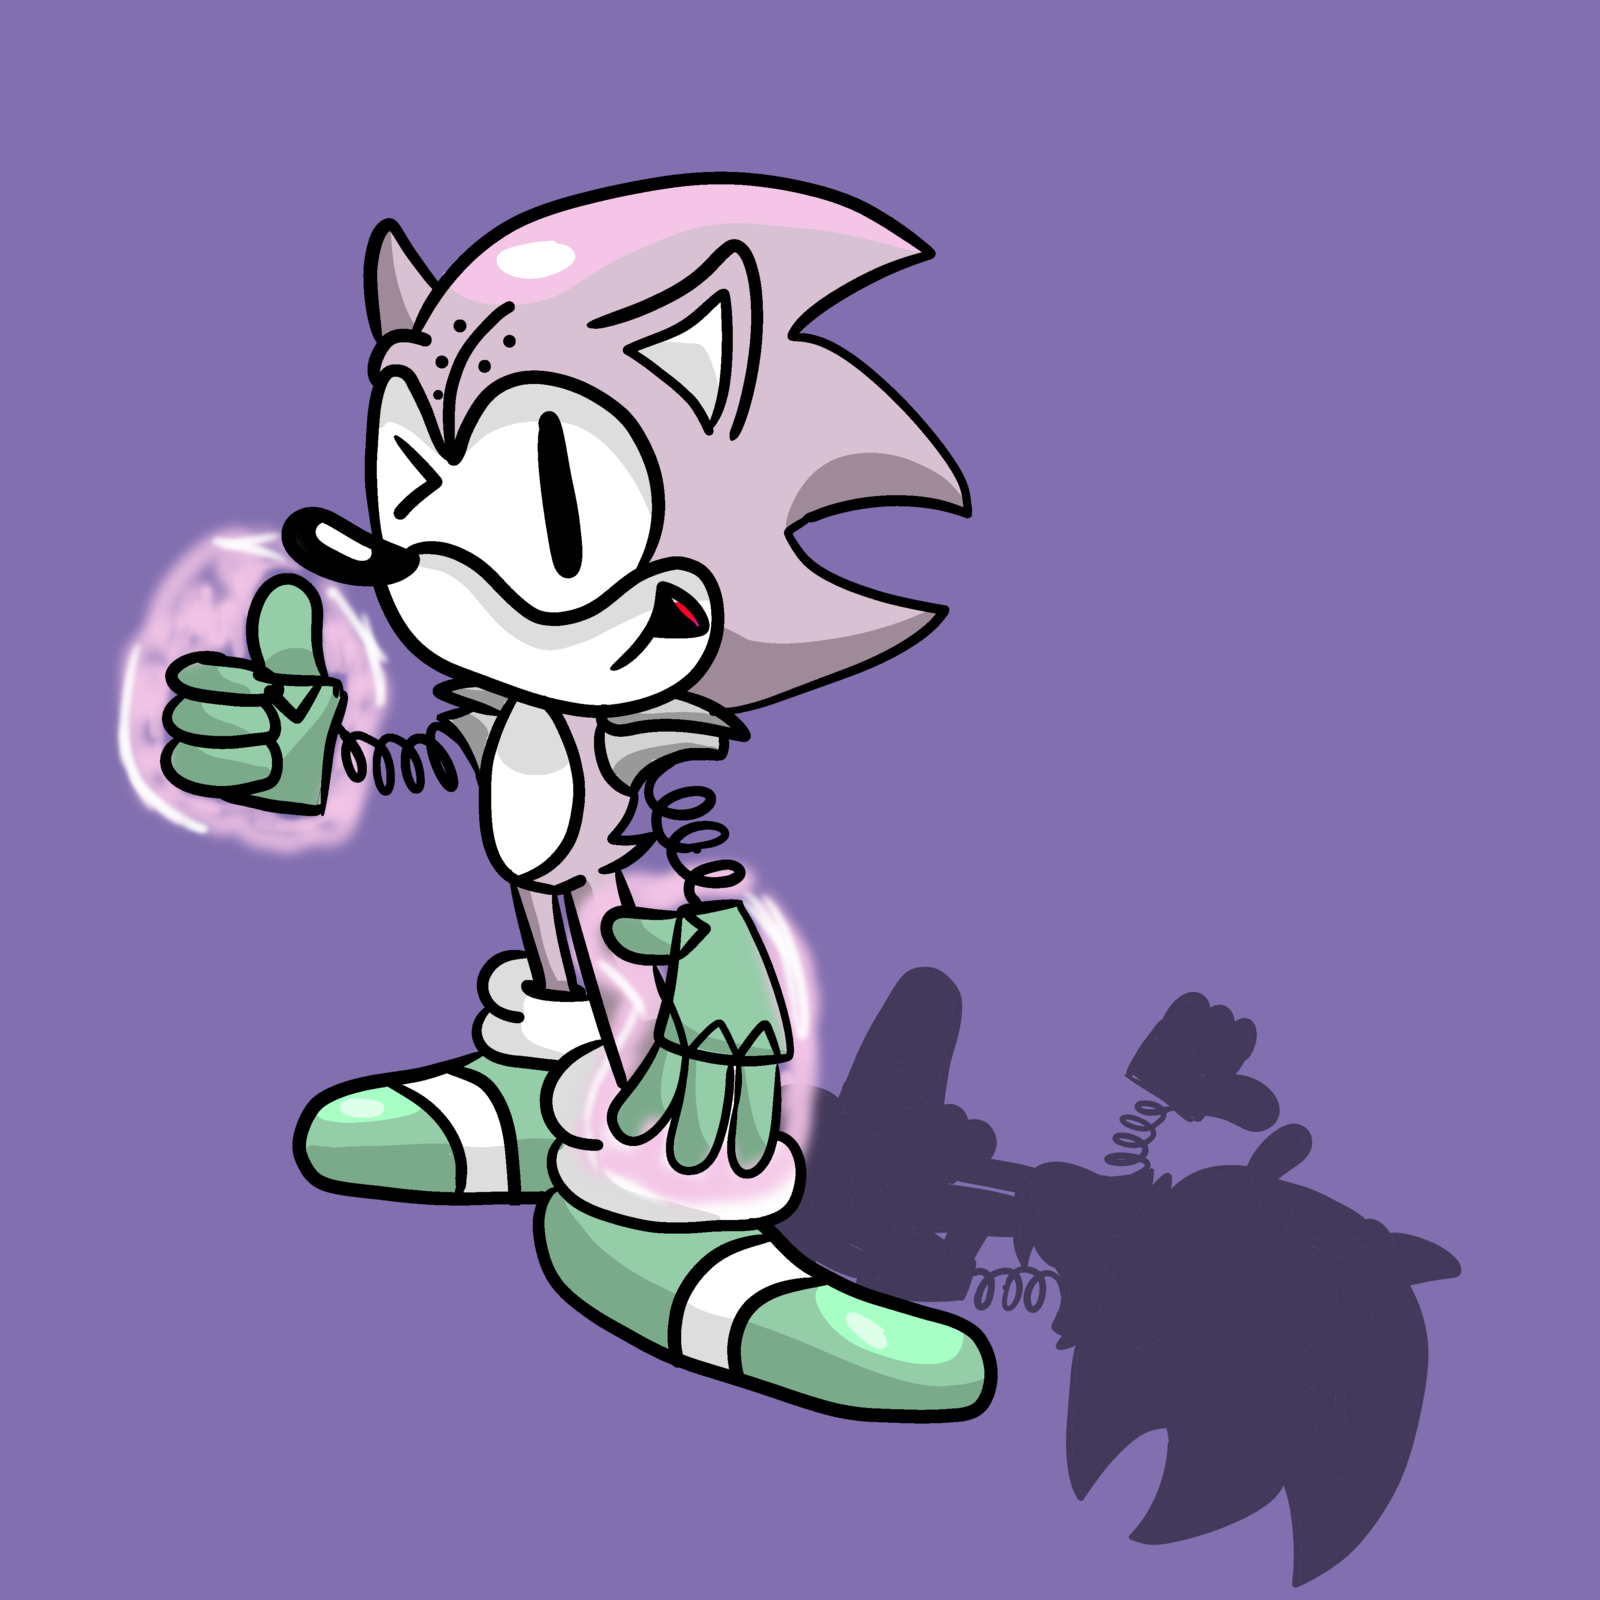 FIND ME ON COHOST AND TUMBLR on X: #realsonicartist sonic characters are  the easiest thing for me to draw, so i find myself drawing them a lot!  (half of the mighty sprites